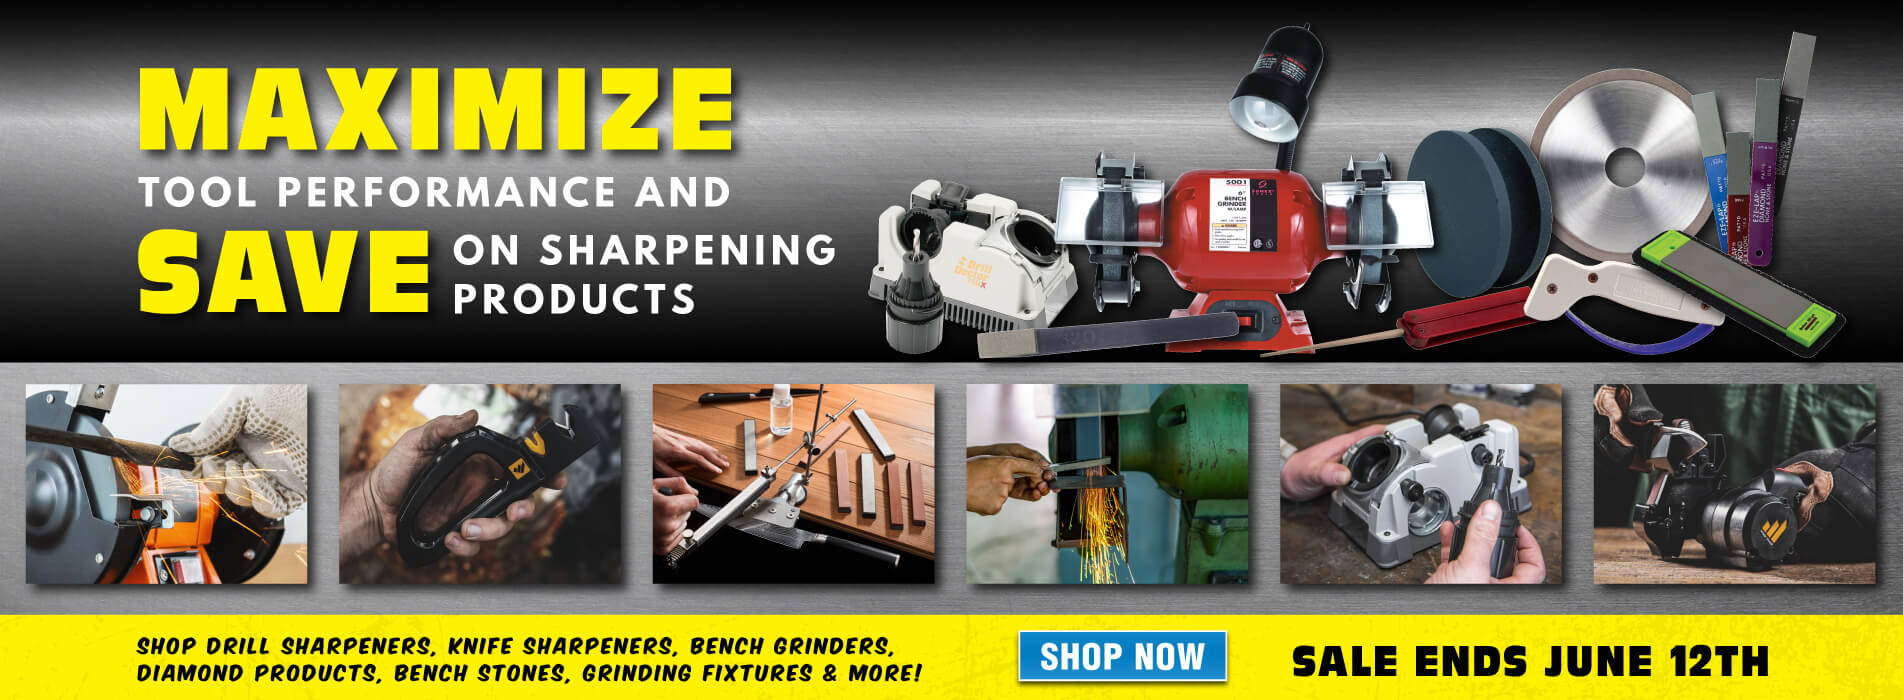 Save on Sharpening Products